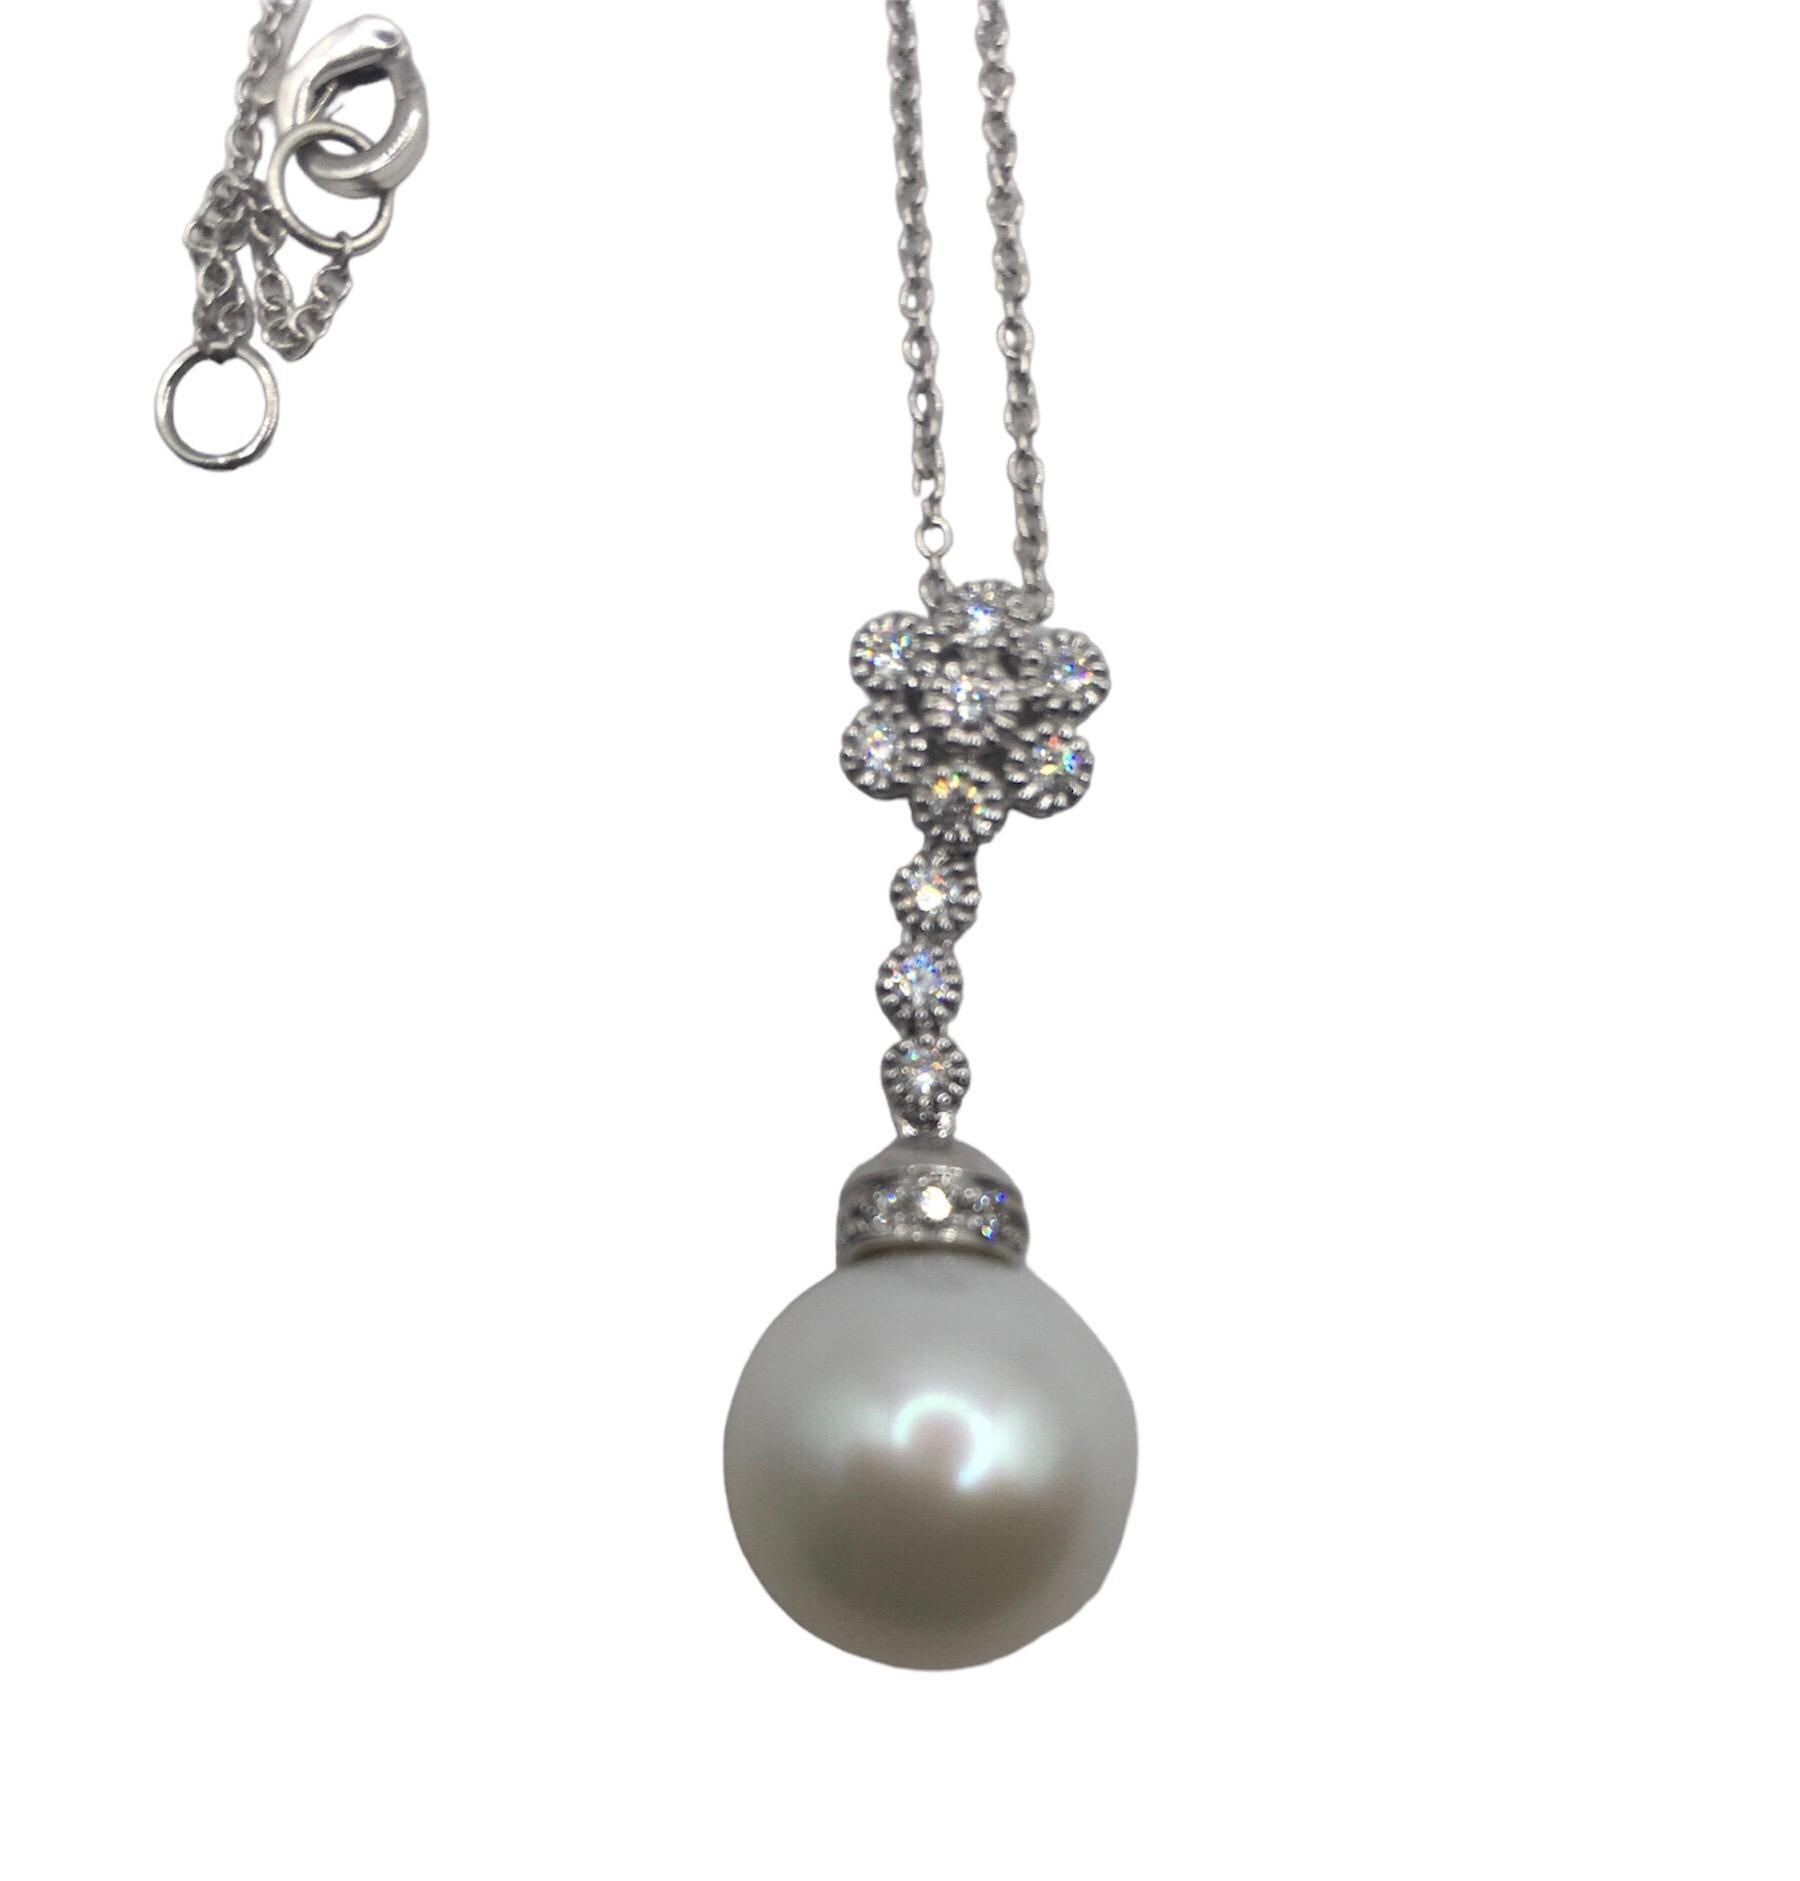 18k white gold chain with pendant with pearl and diamonds
Stamp 750 10 MI
pearl diameter 11 mm
diamonds ct 0.23
gold weight 2.70 g
the full set is available